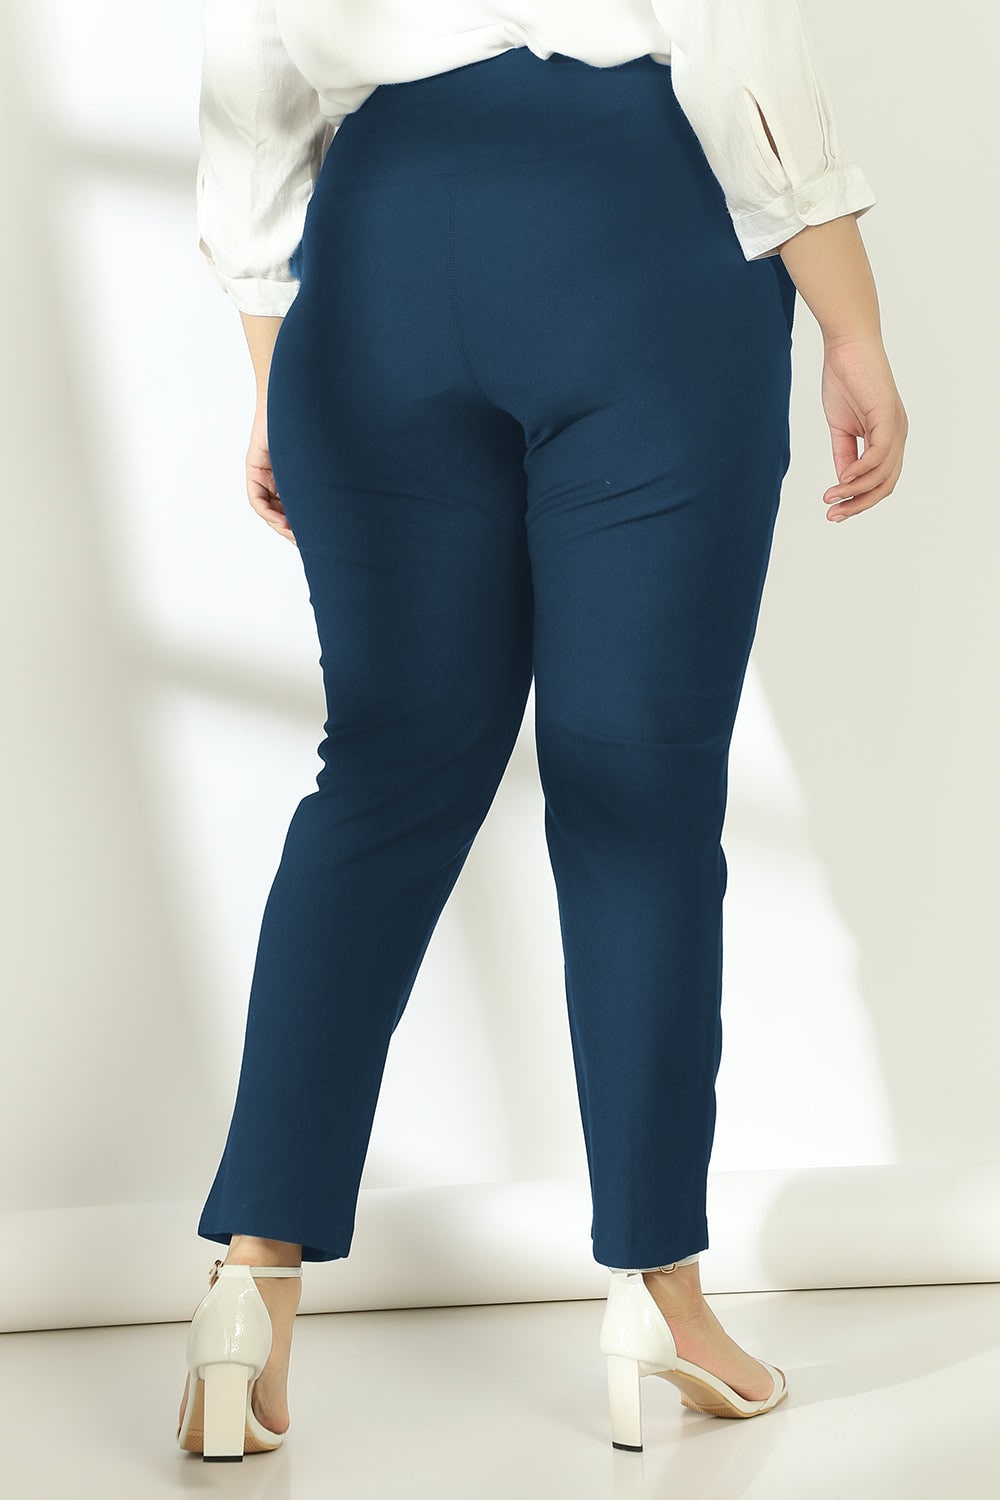 RSVP by Nykaa Fashion Electric Blue Solid High Waist Tapered Trouser Buy  RSVP by Nykaa Fashion Electric Blue Solid High Waist Tapered Trouser Online  at Best Price in India  Nykaa